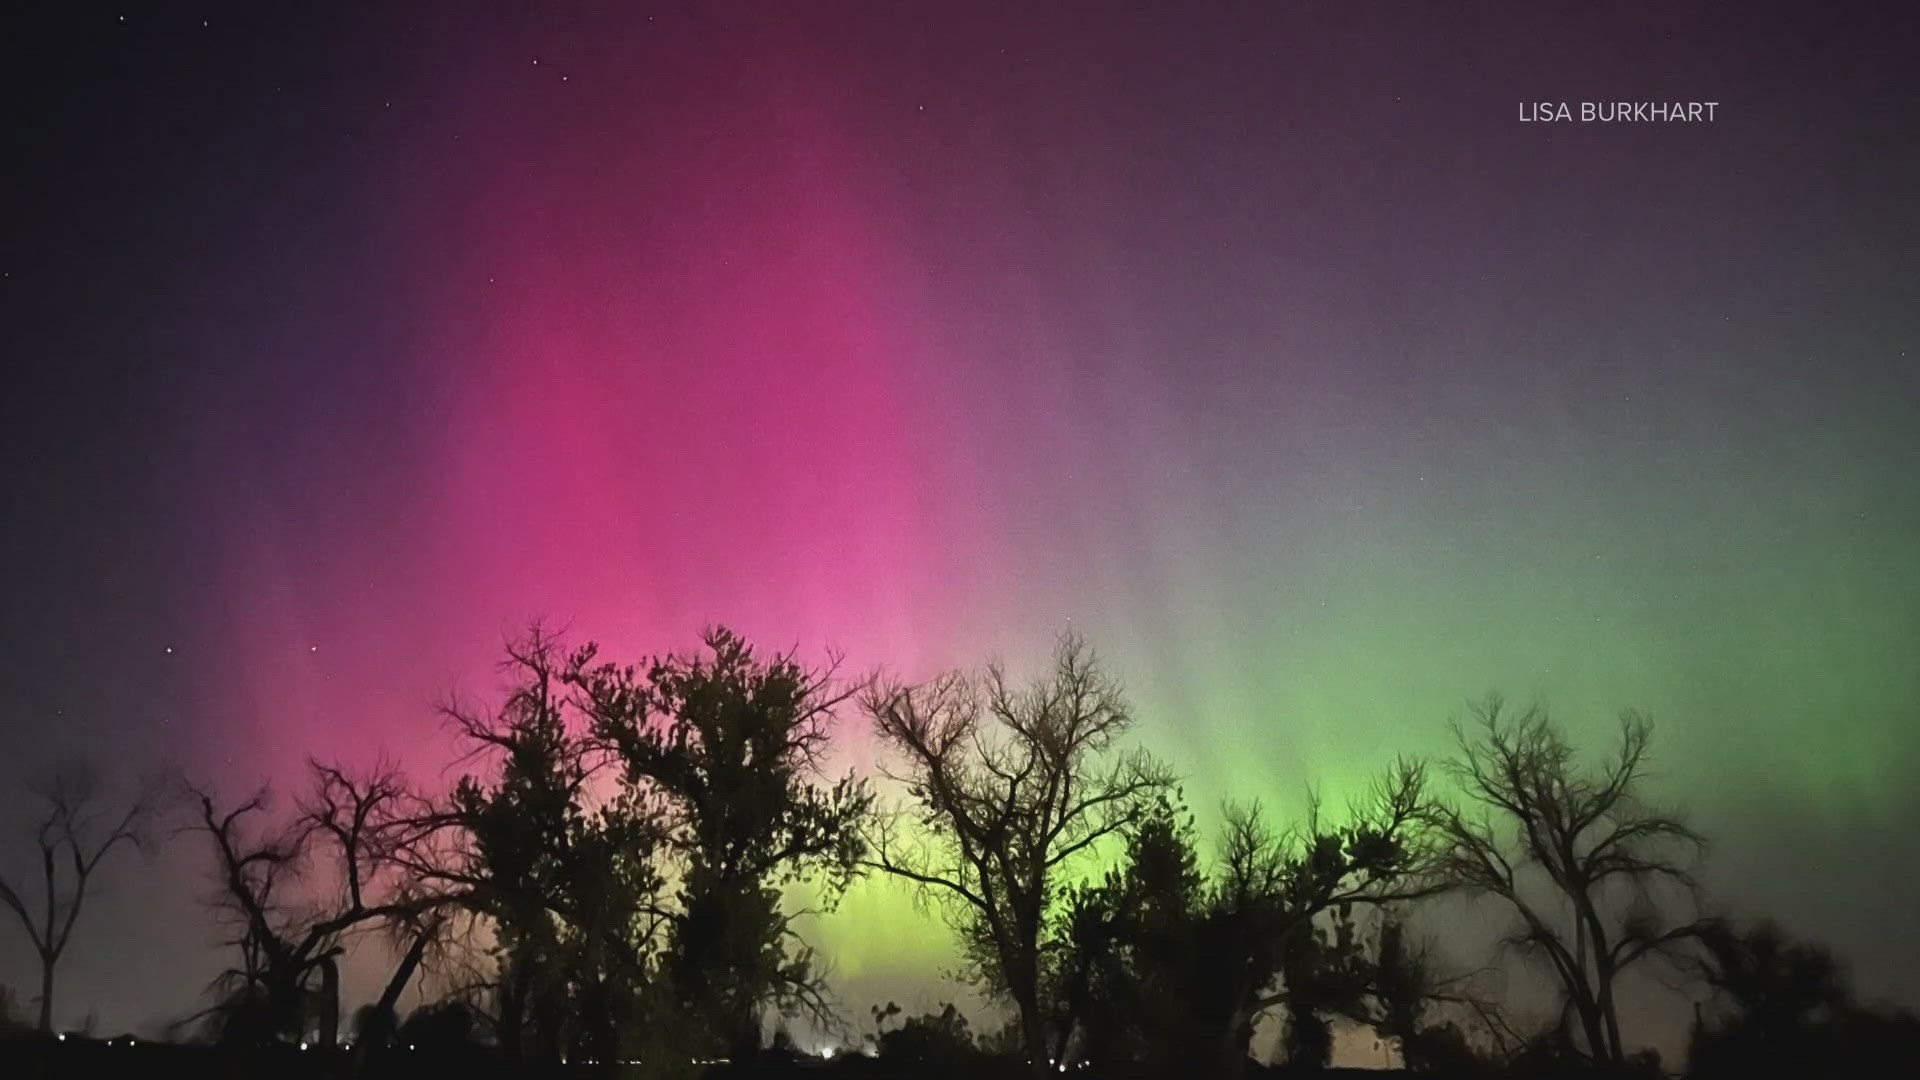 Viewers sent incredible photos of the northern lights, which made a rare appearance above Colorado Friday night.